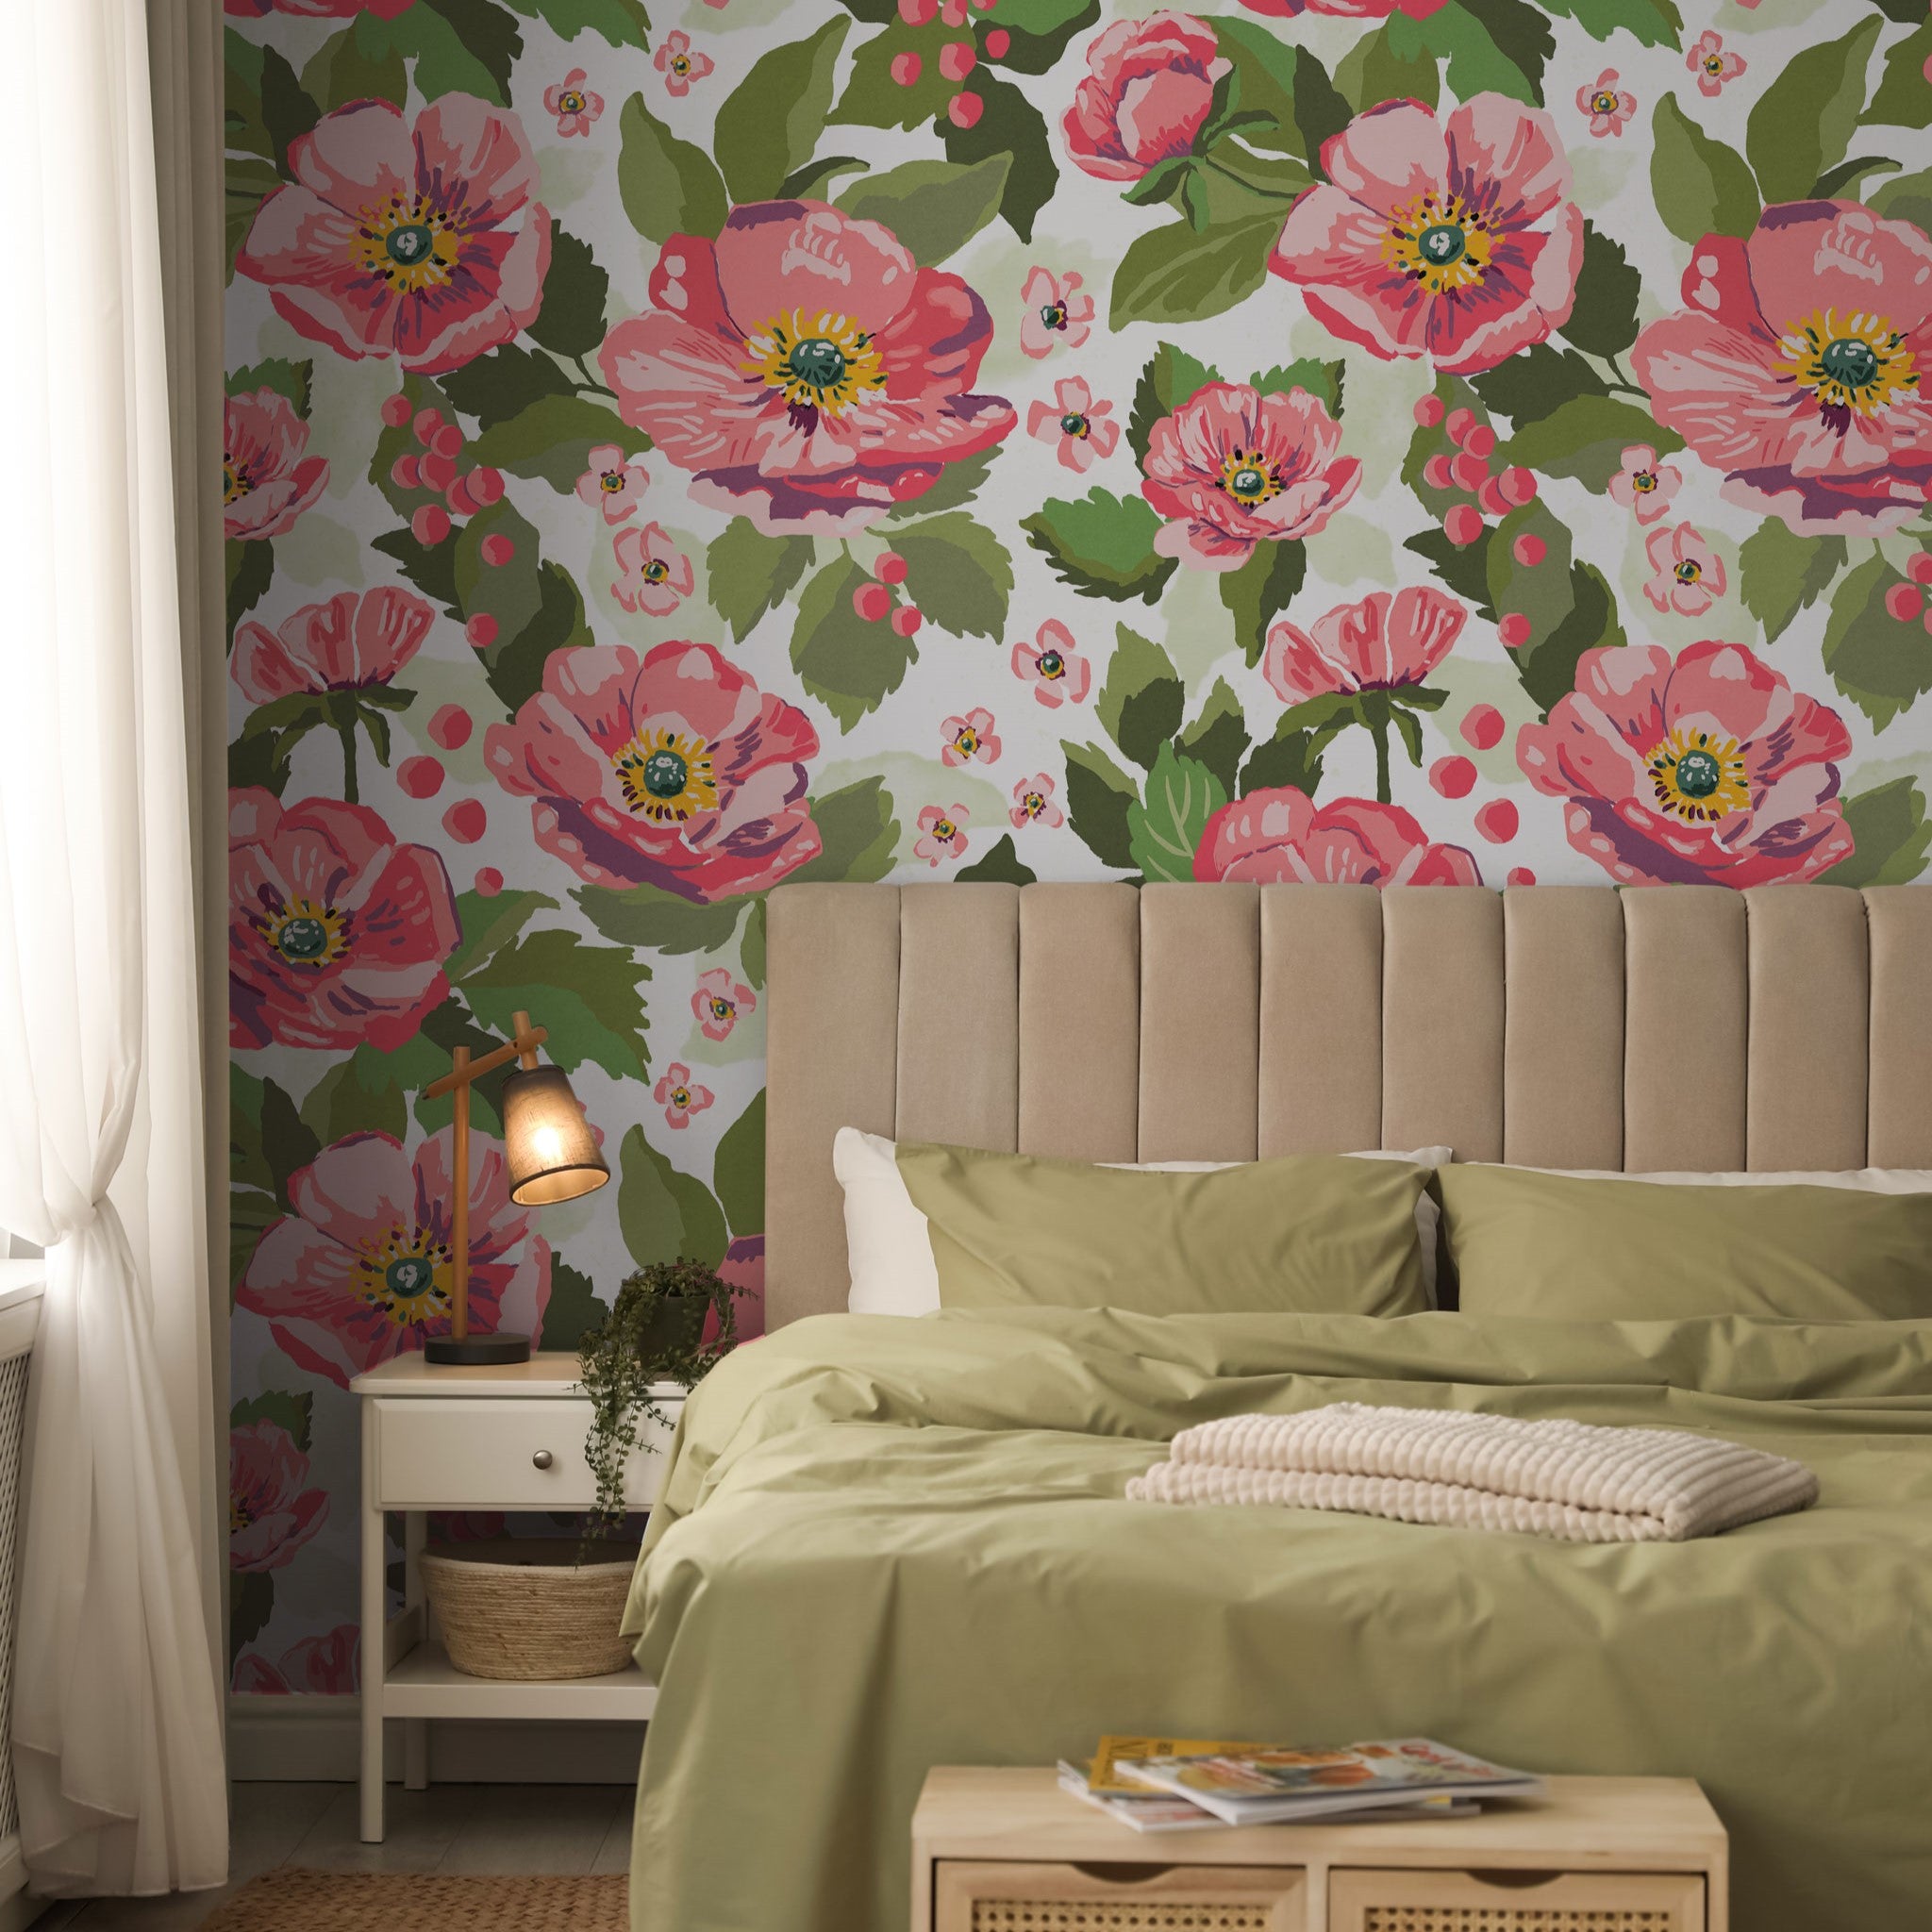 "Wall Blush Anemones Wallpaper in cozy bedroom, floral design focus, stylish home decor"